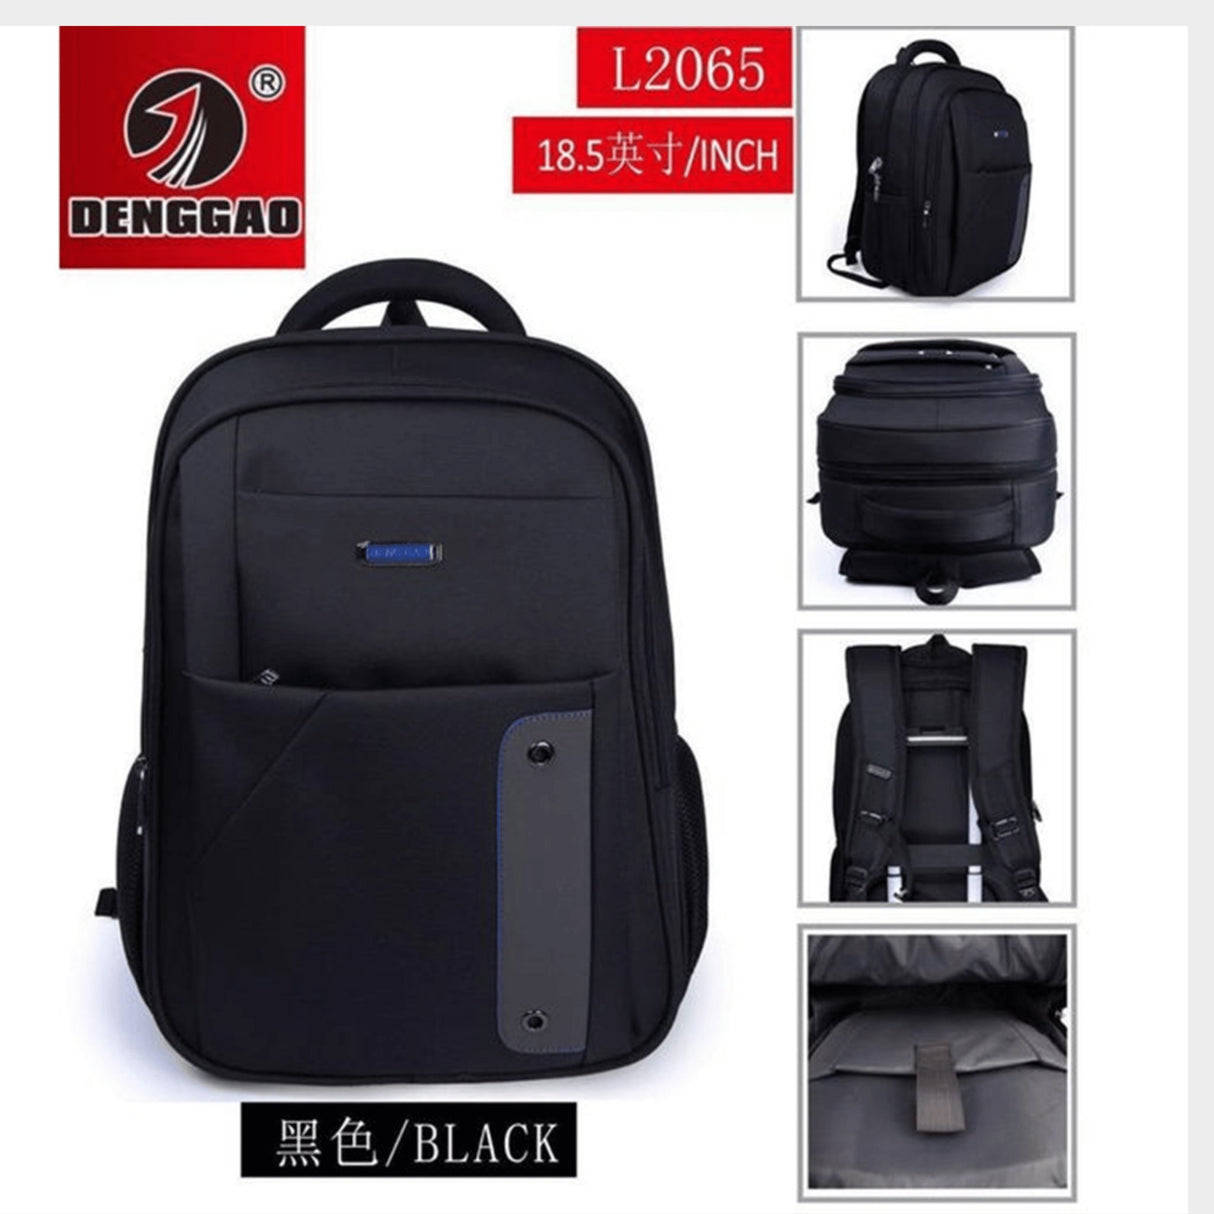 DENGGAO Anti-Theft Travel Laptop Backpack 18.5 Inch - Multi-Colours  - KWT Tech Mart